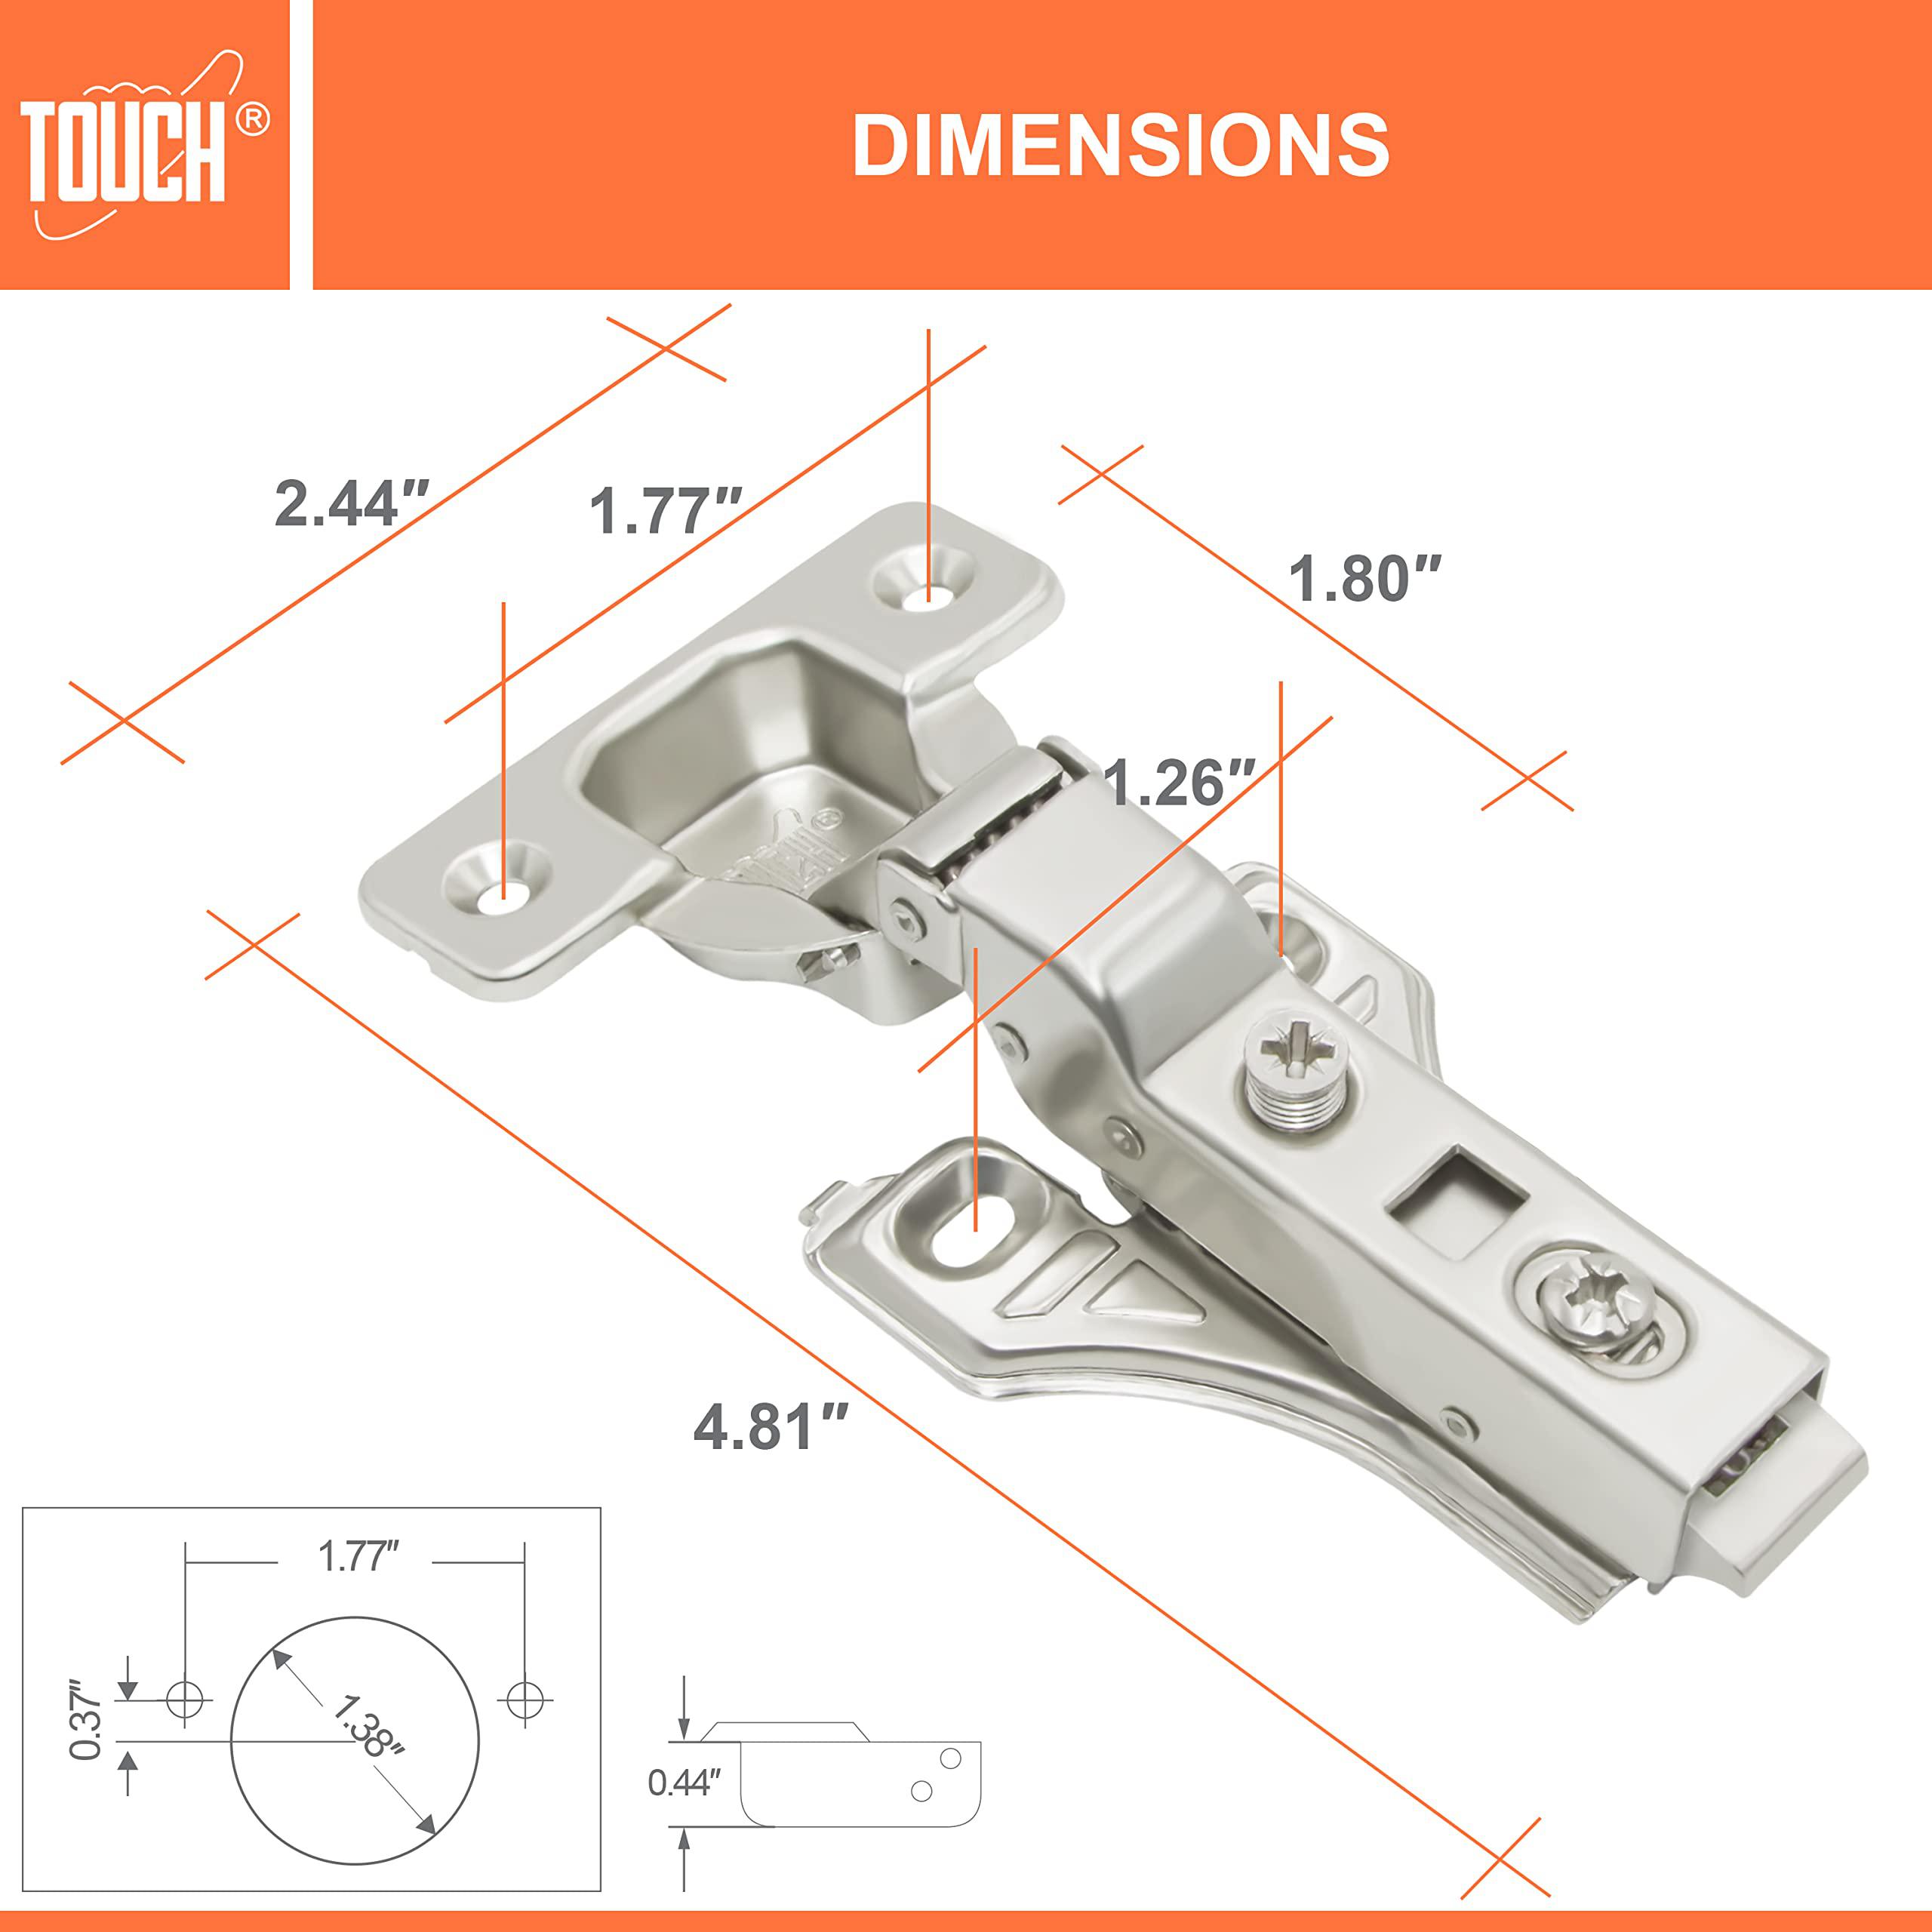 touch cabinet hinges (1 pair, 2 pcs) face frame cupboard door soft close hinges 3/8" inch half overlay concealed european cli